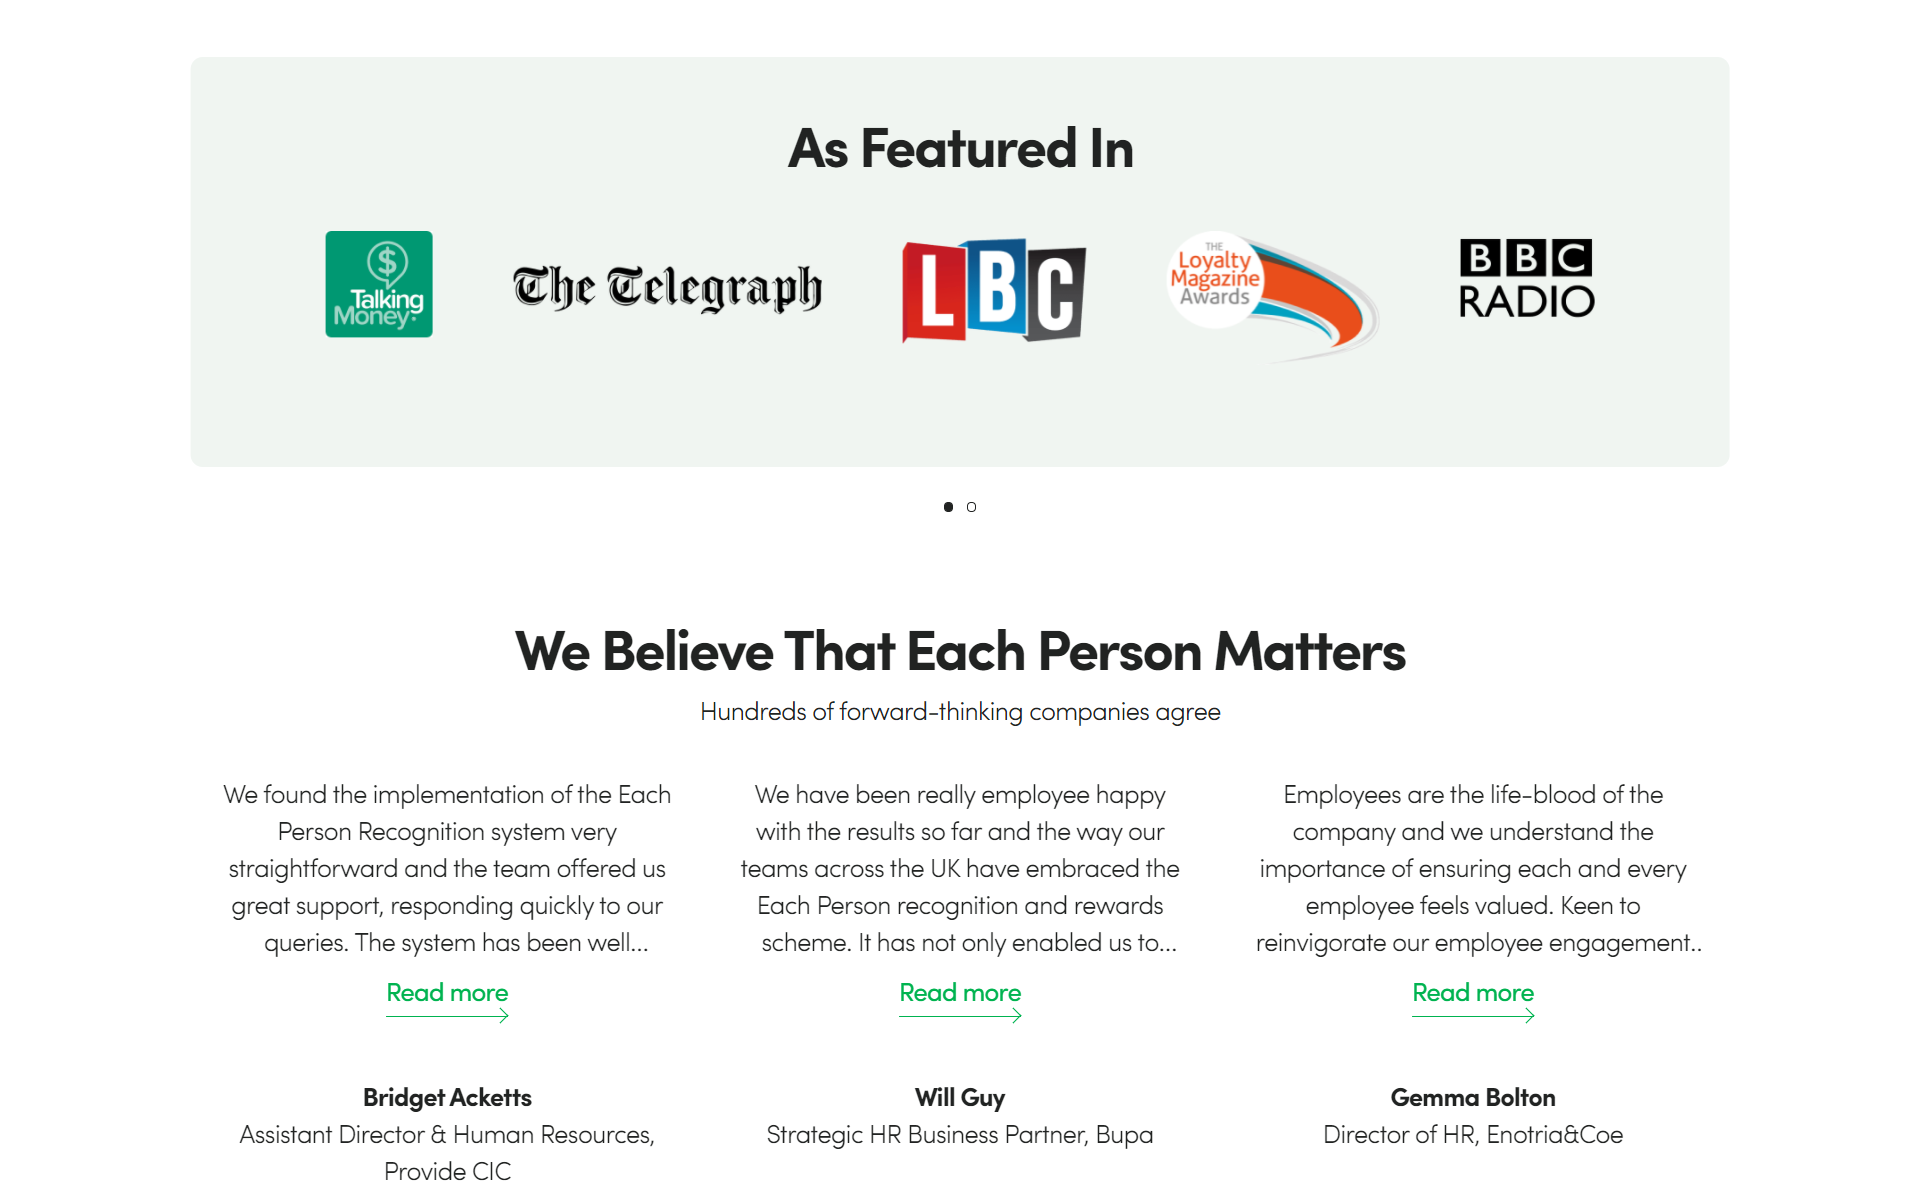 Each Person has been featured in LBC, BBC, the Telegraph and many more!